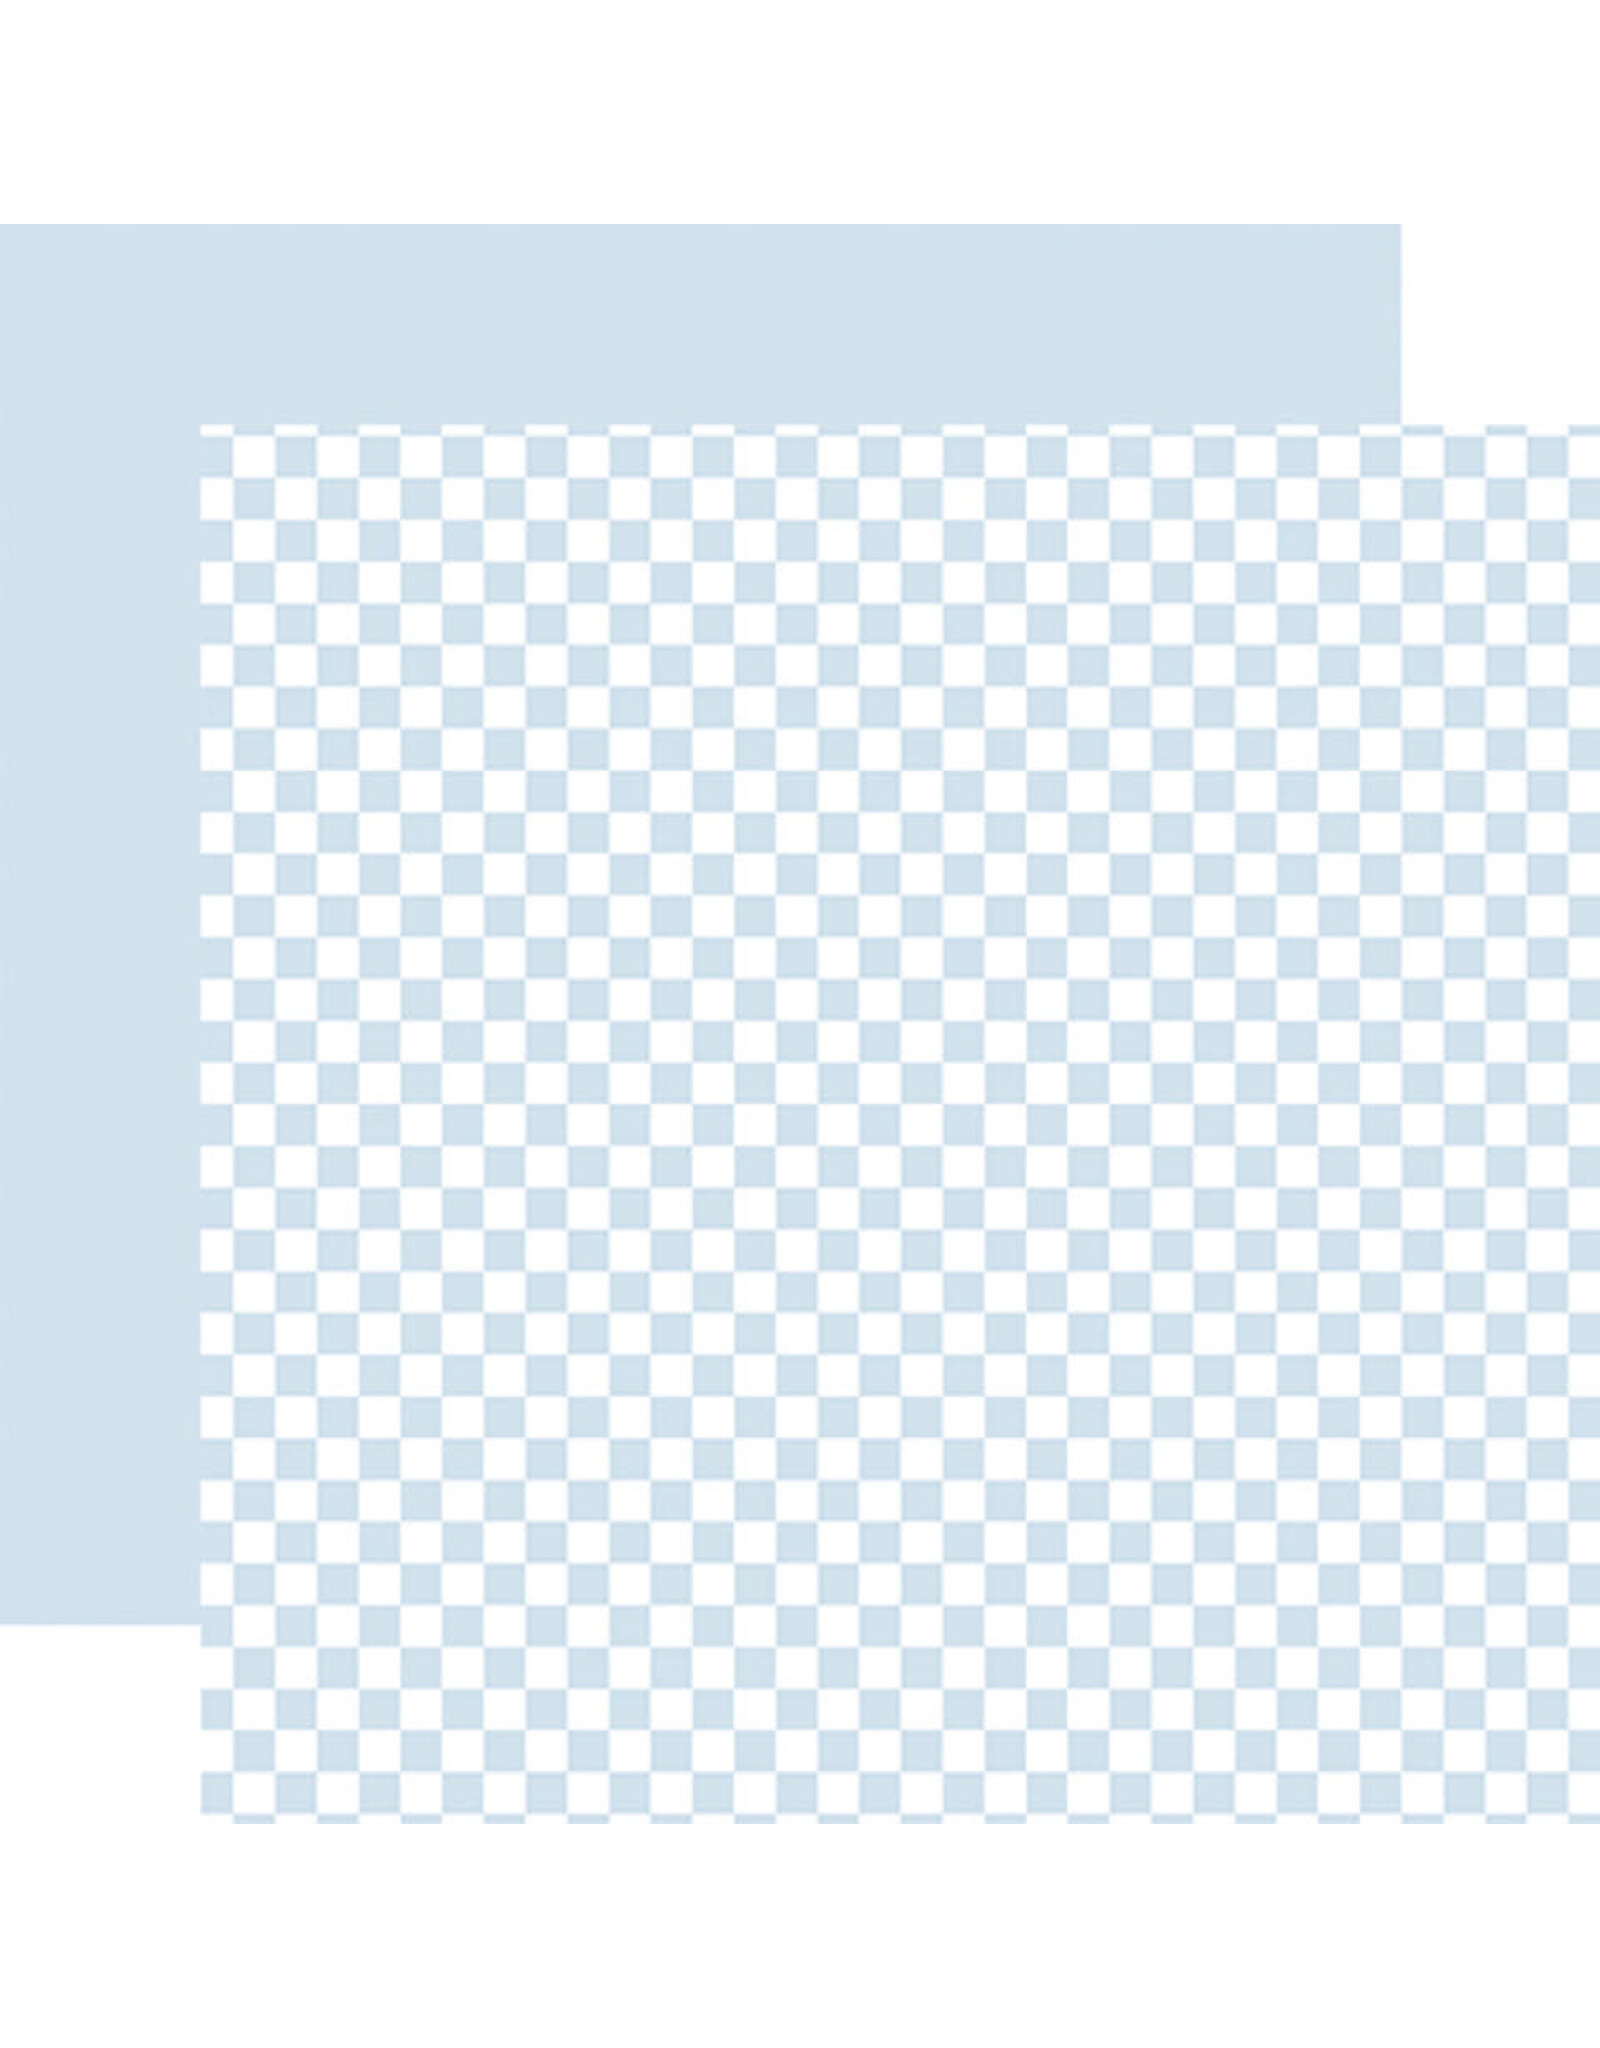 Echo Park Checkerboard: Baby Blue 12x12 Patterned Paper